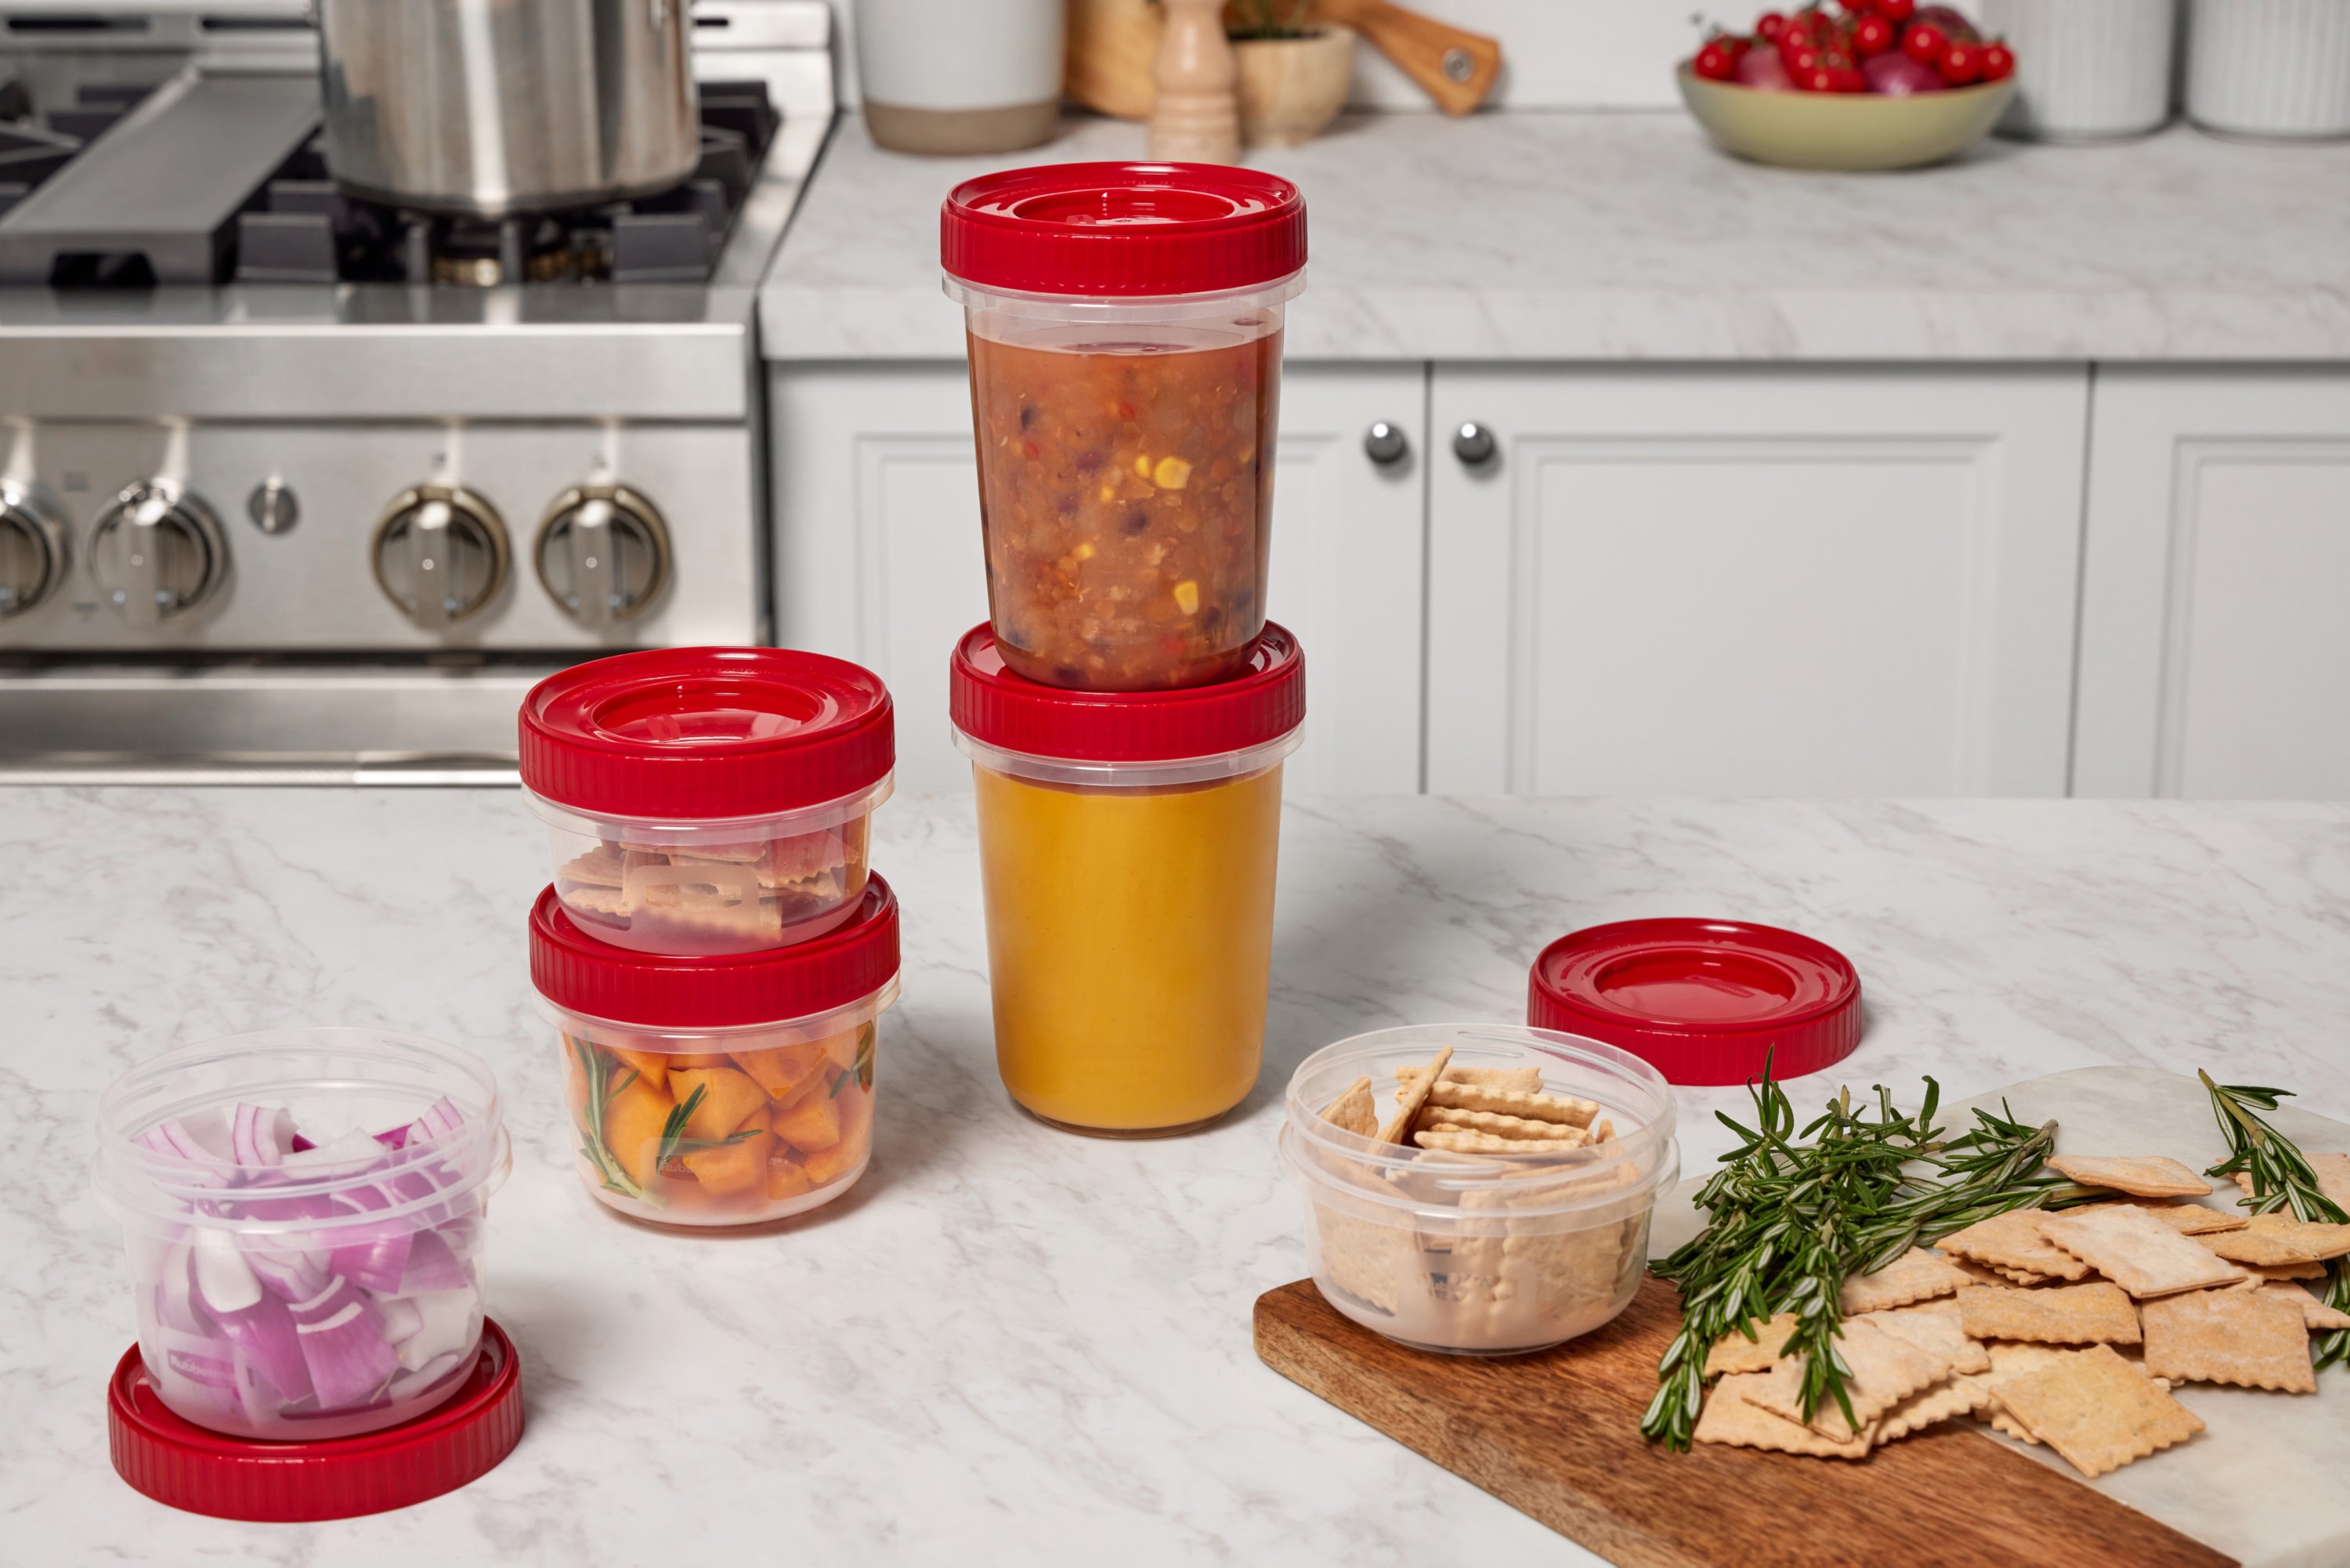 Rubbermaid TakeAlongs Twist Top 2-Cup Food Storage Containers, 3-Pc. Set